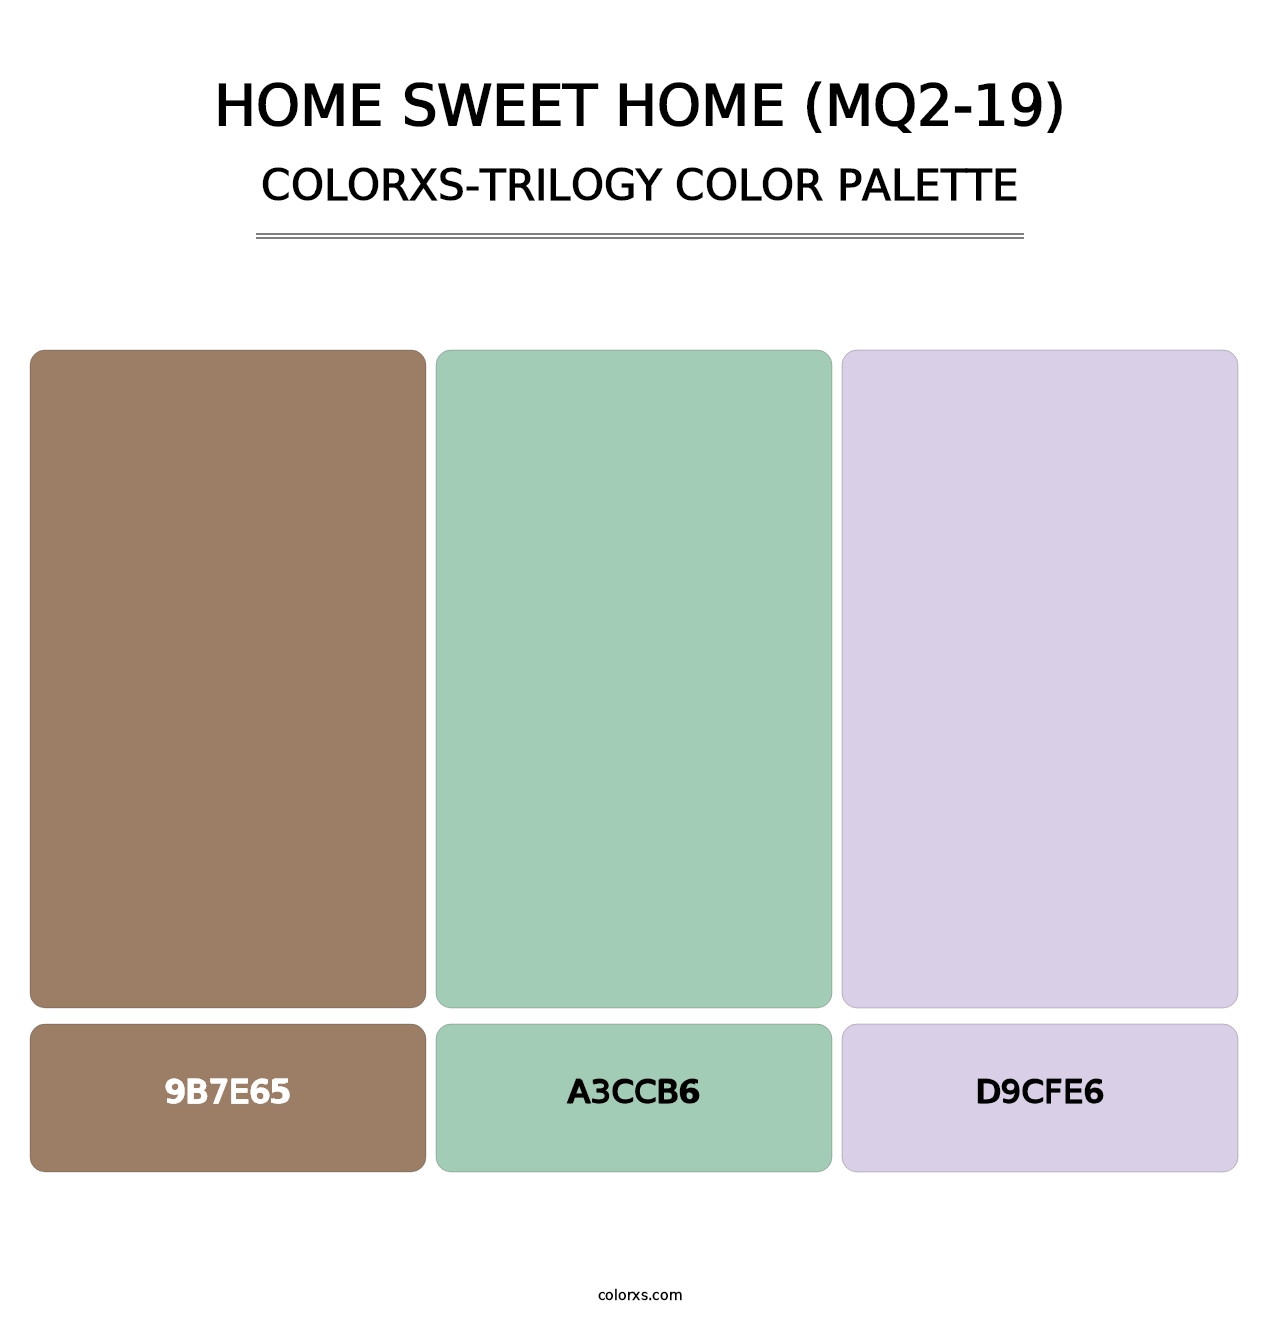 Home Sweet Home (MQ2-19) - Colorxs Trilogy Palette